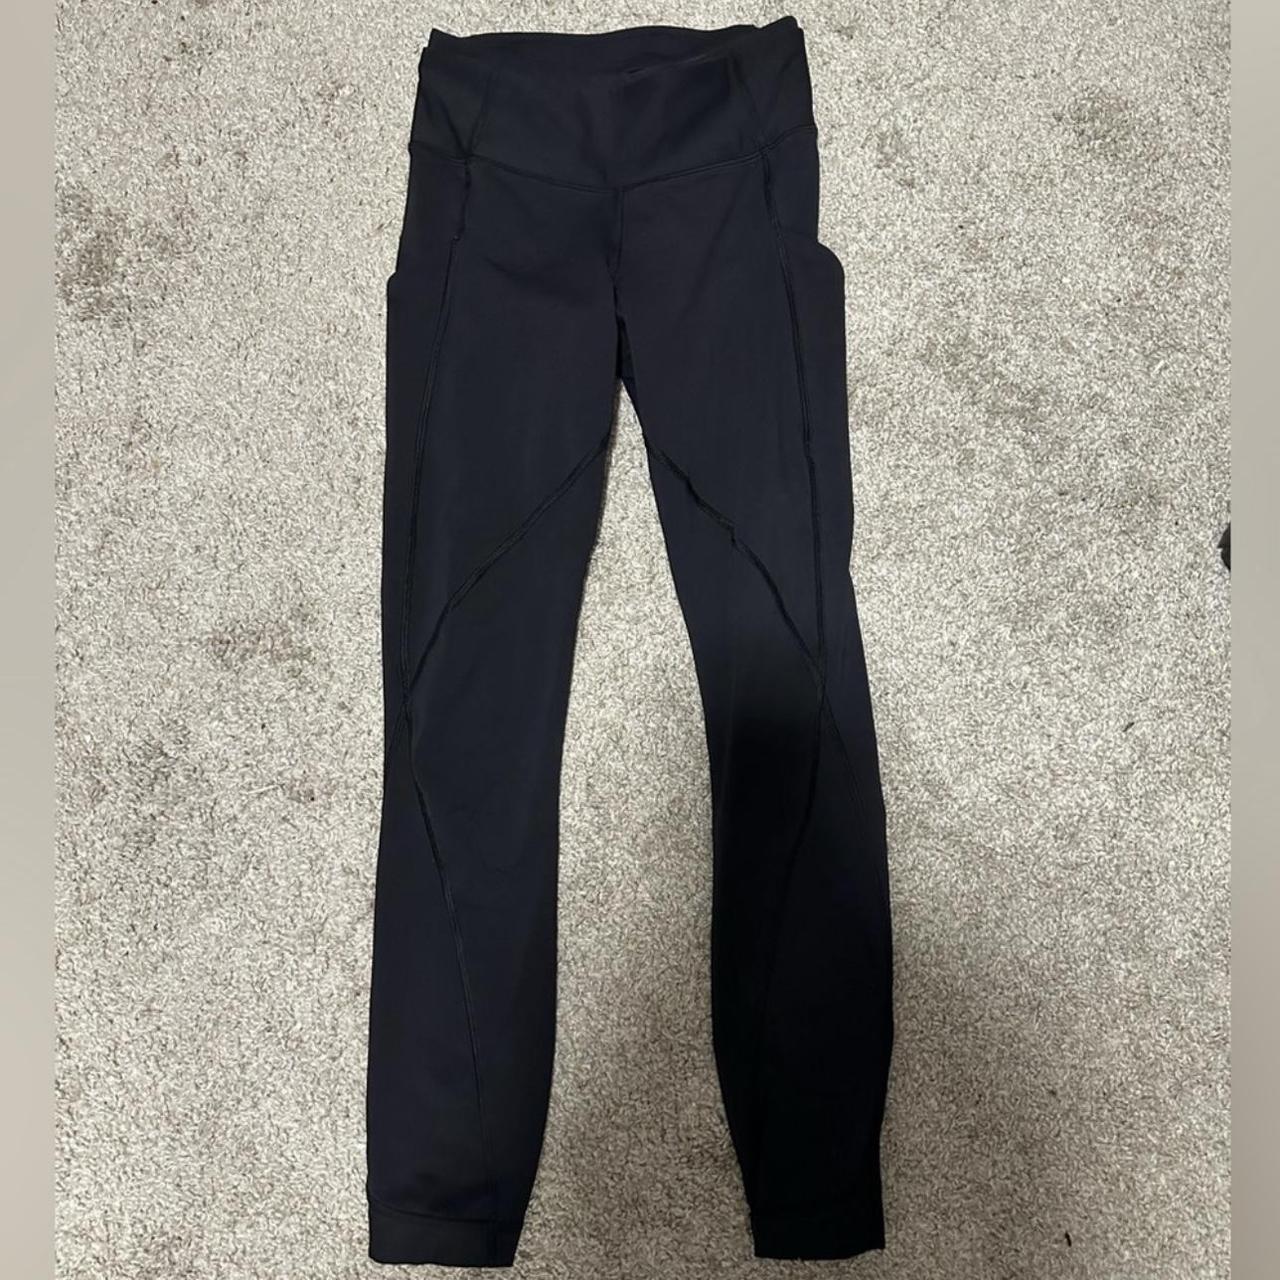 Lululemon leggings with side pockets and a crossover - Depop